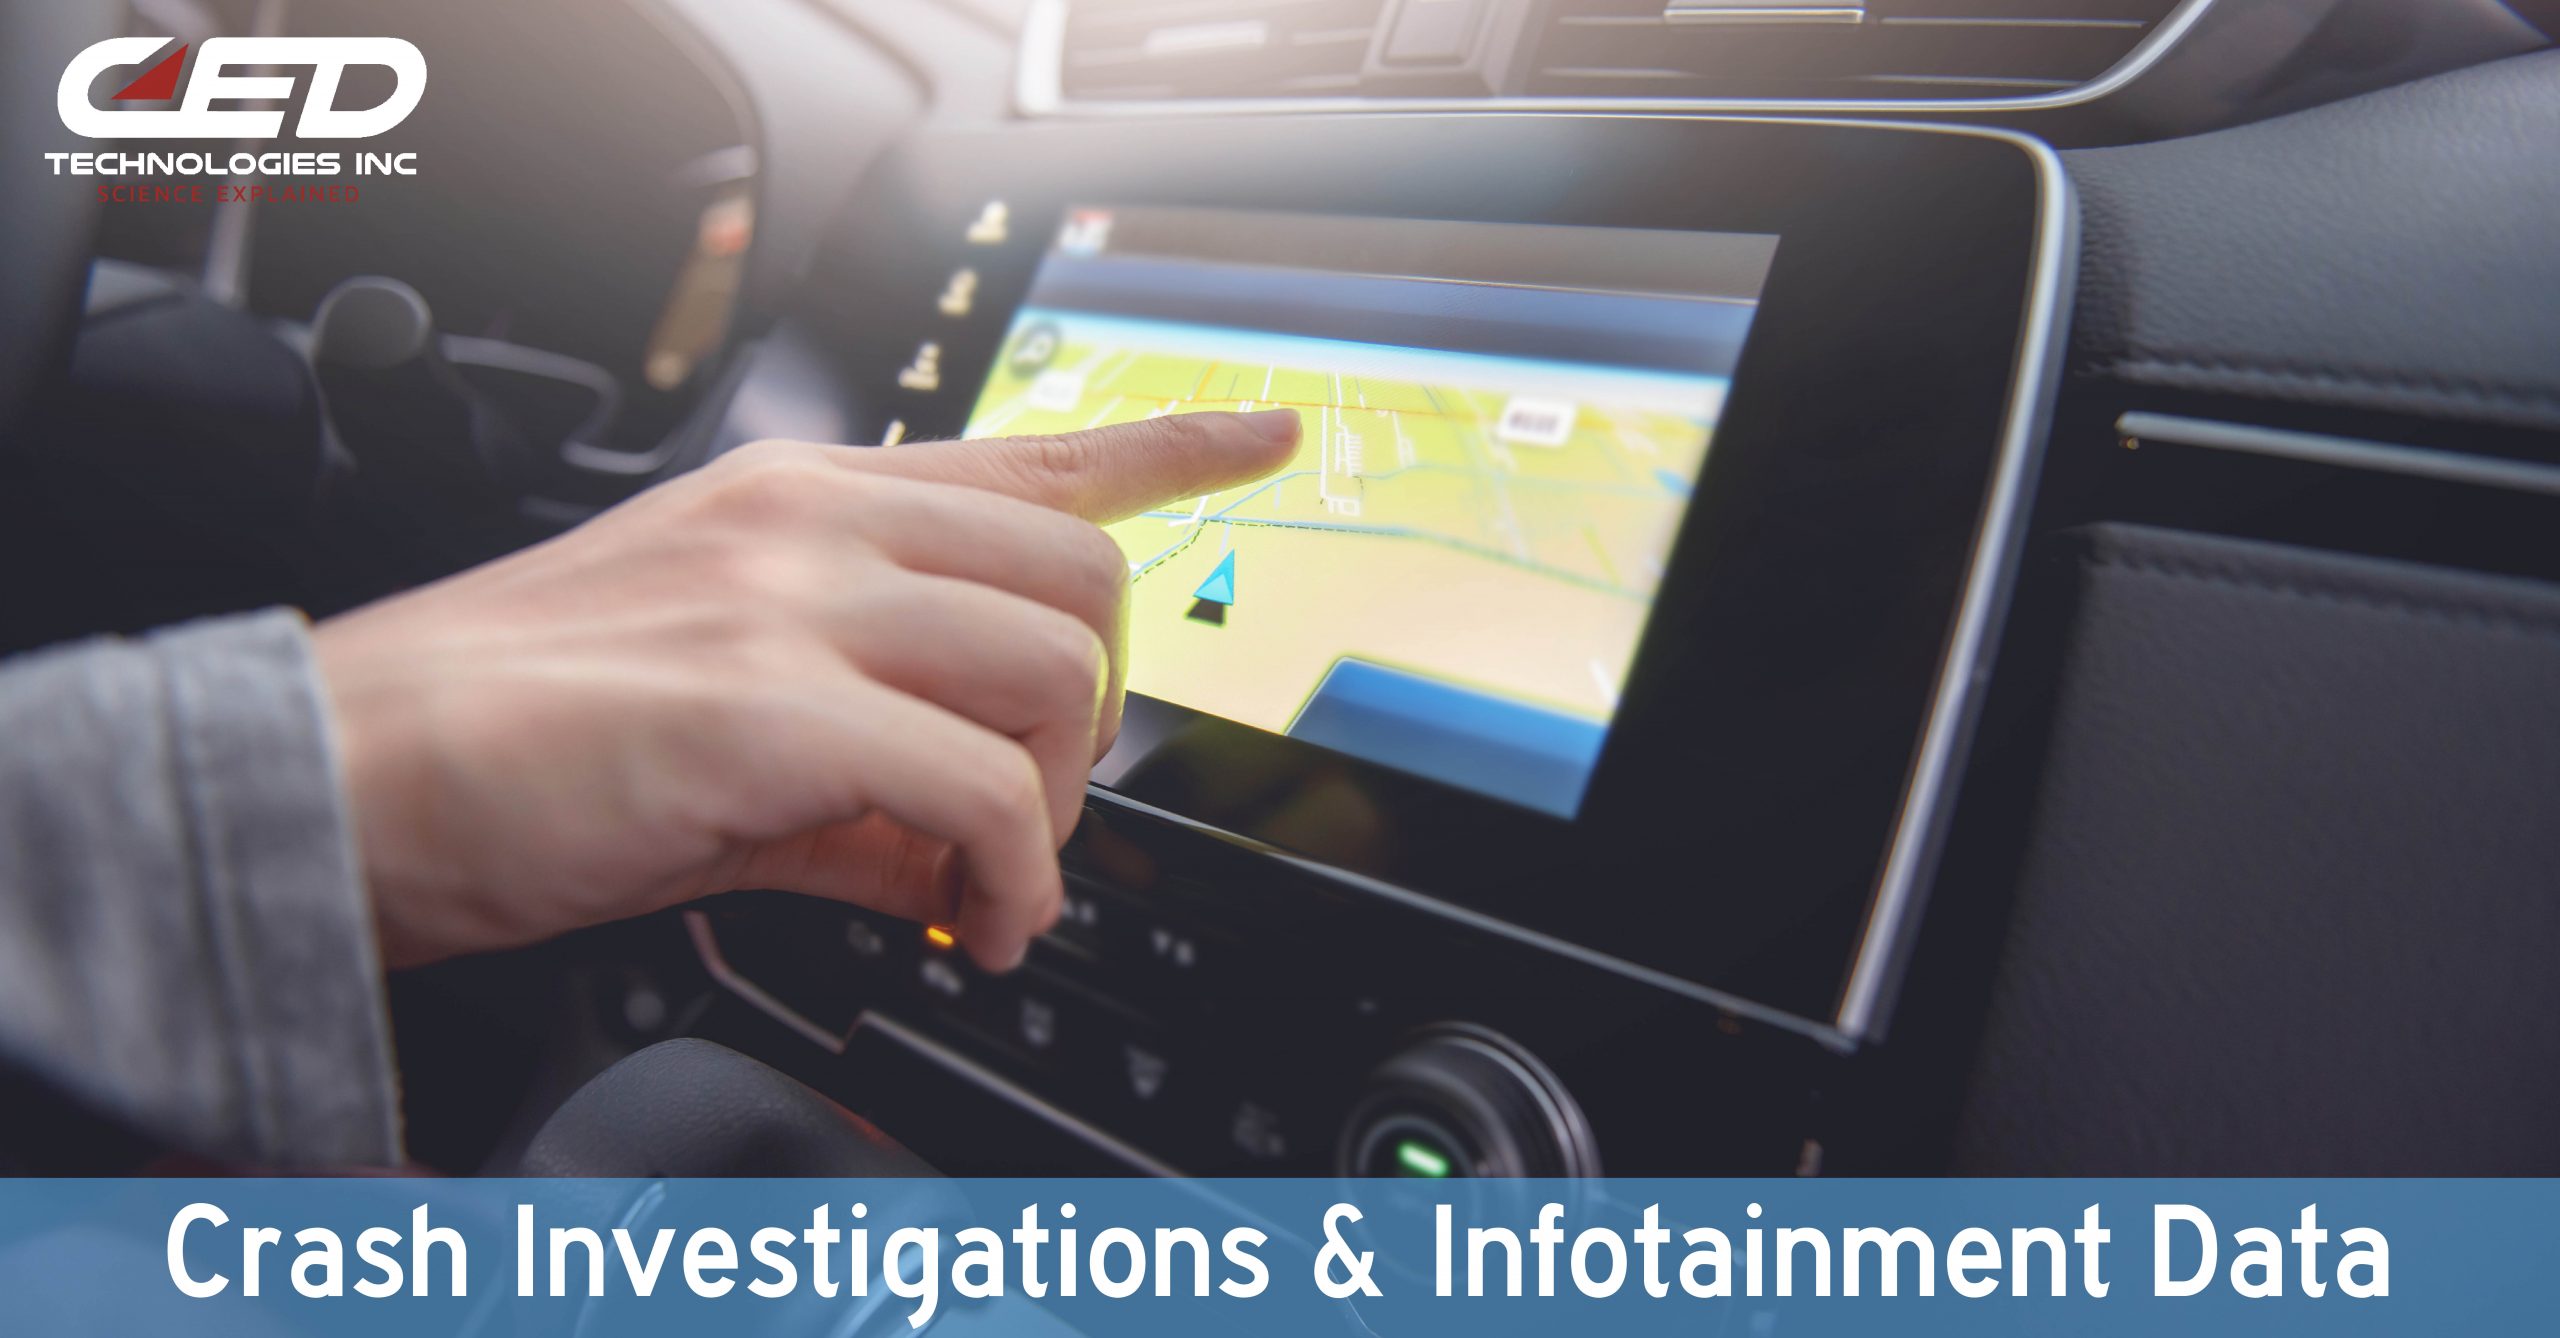 Using Infotainment Data in Accident Investigations